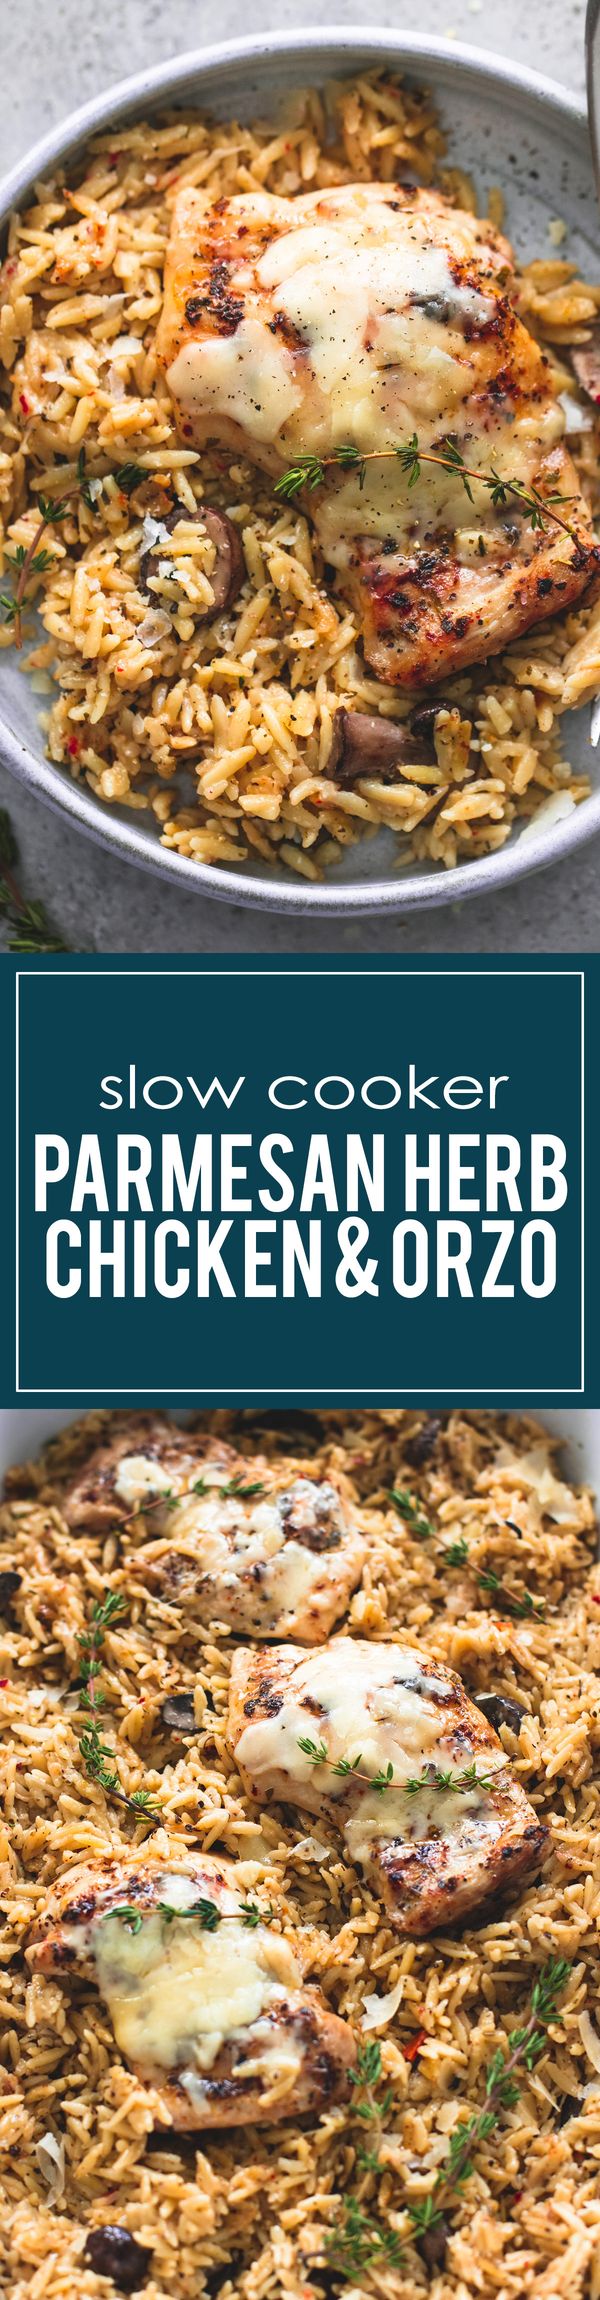 Slow Cooker Parmesan Herb Chicken & Orzo